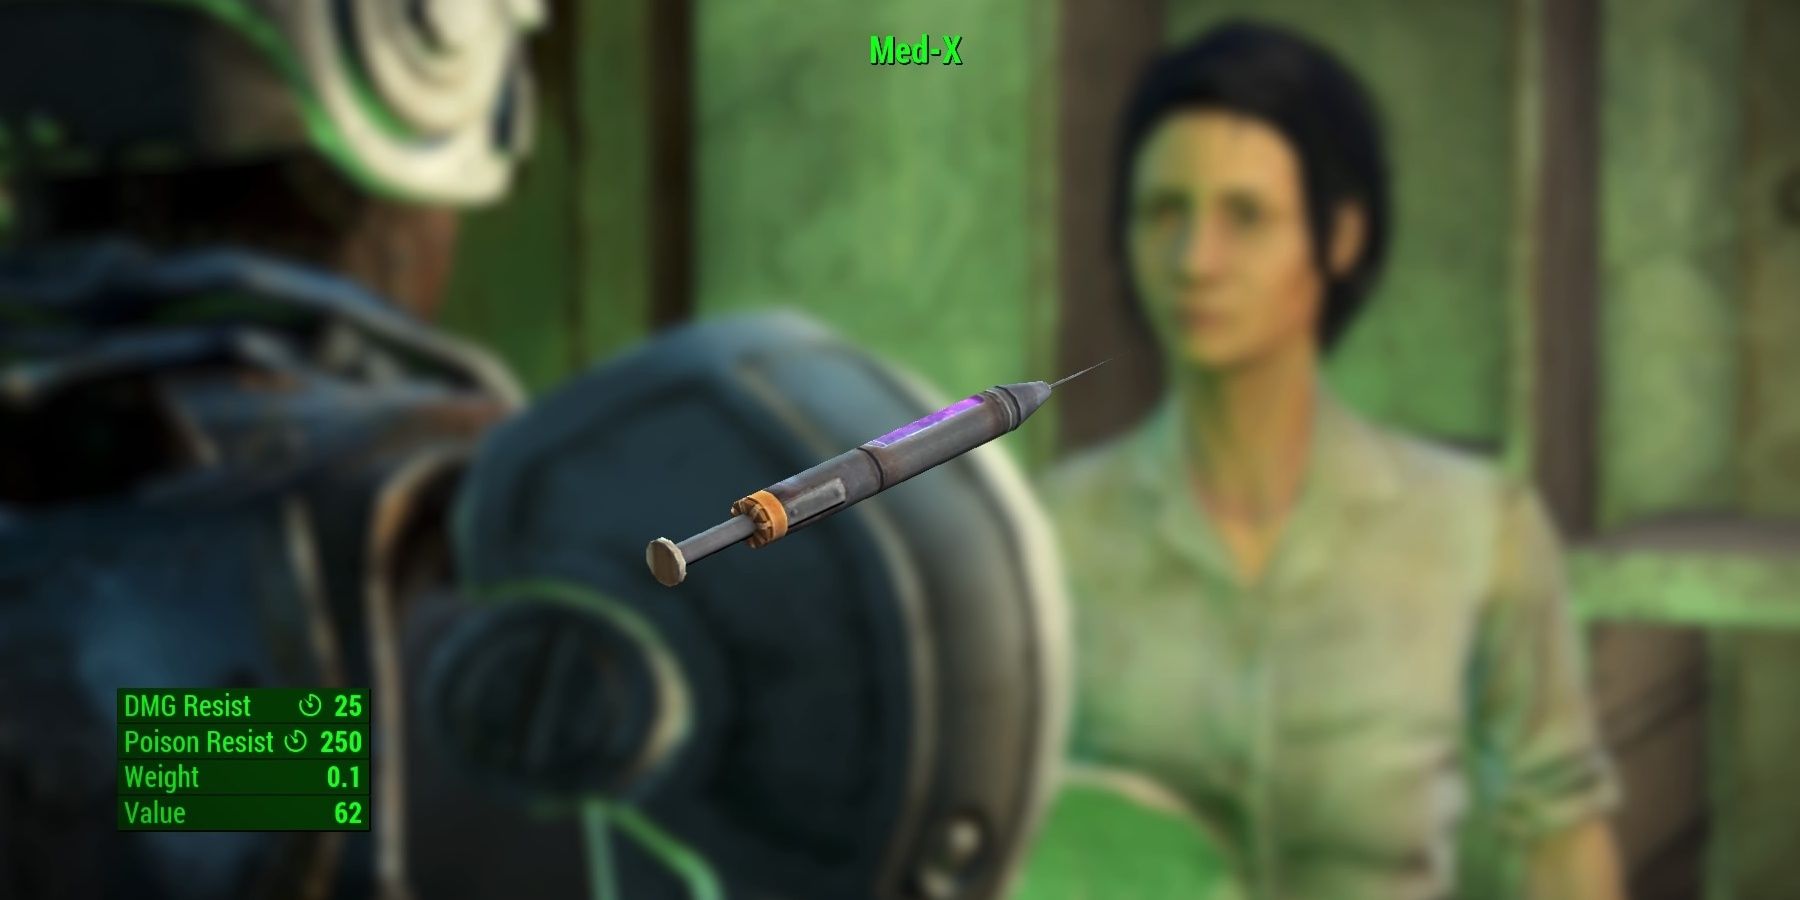 Med-x in Fallout 4